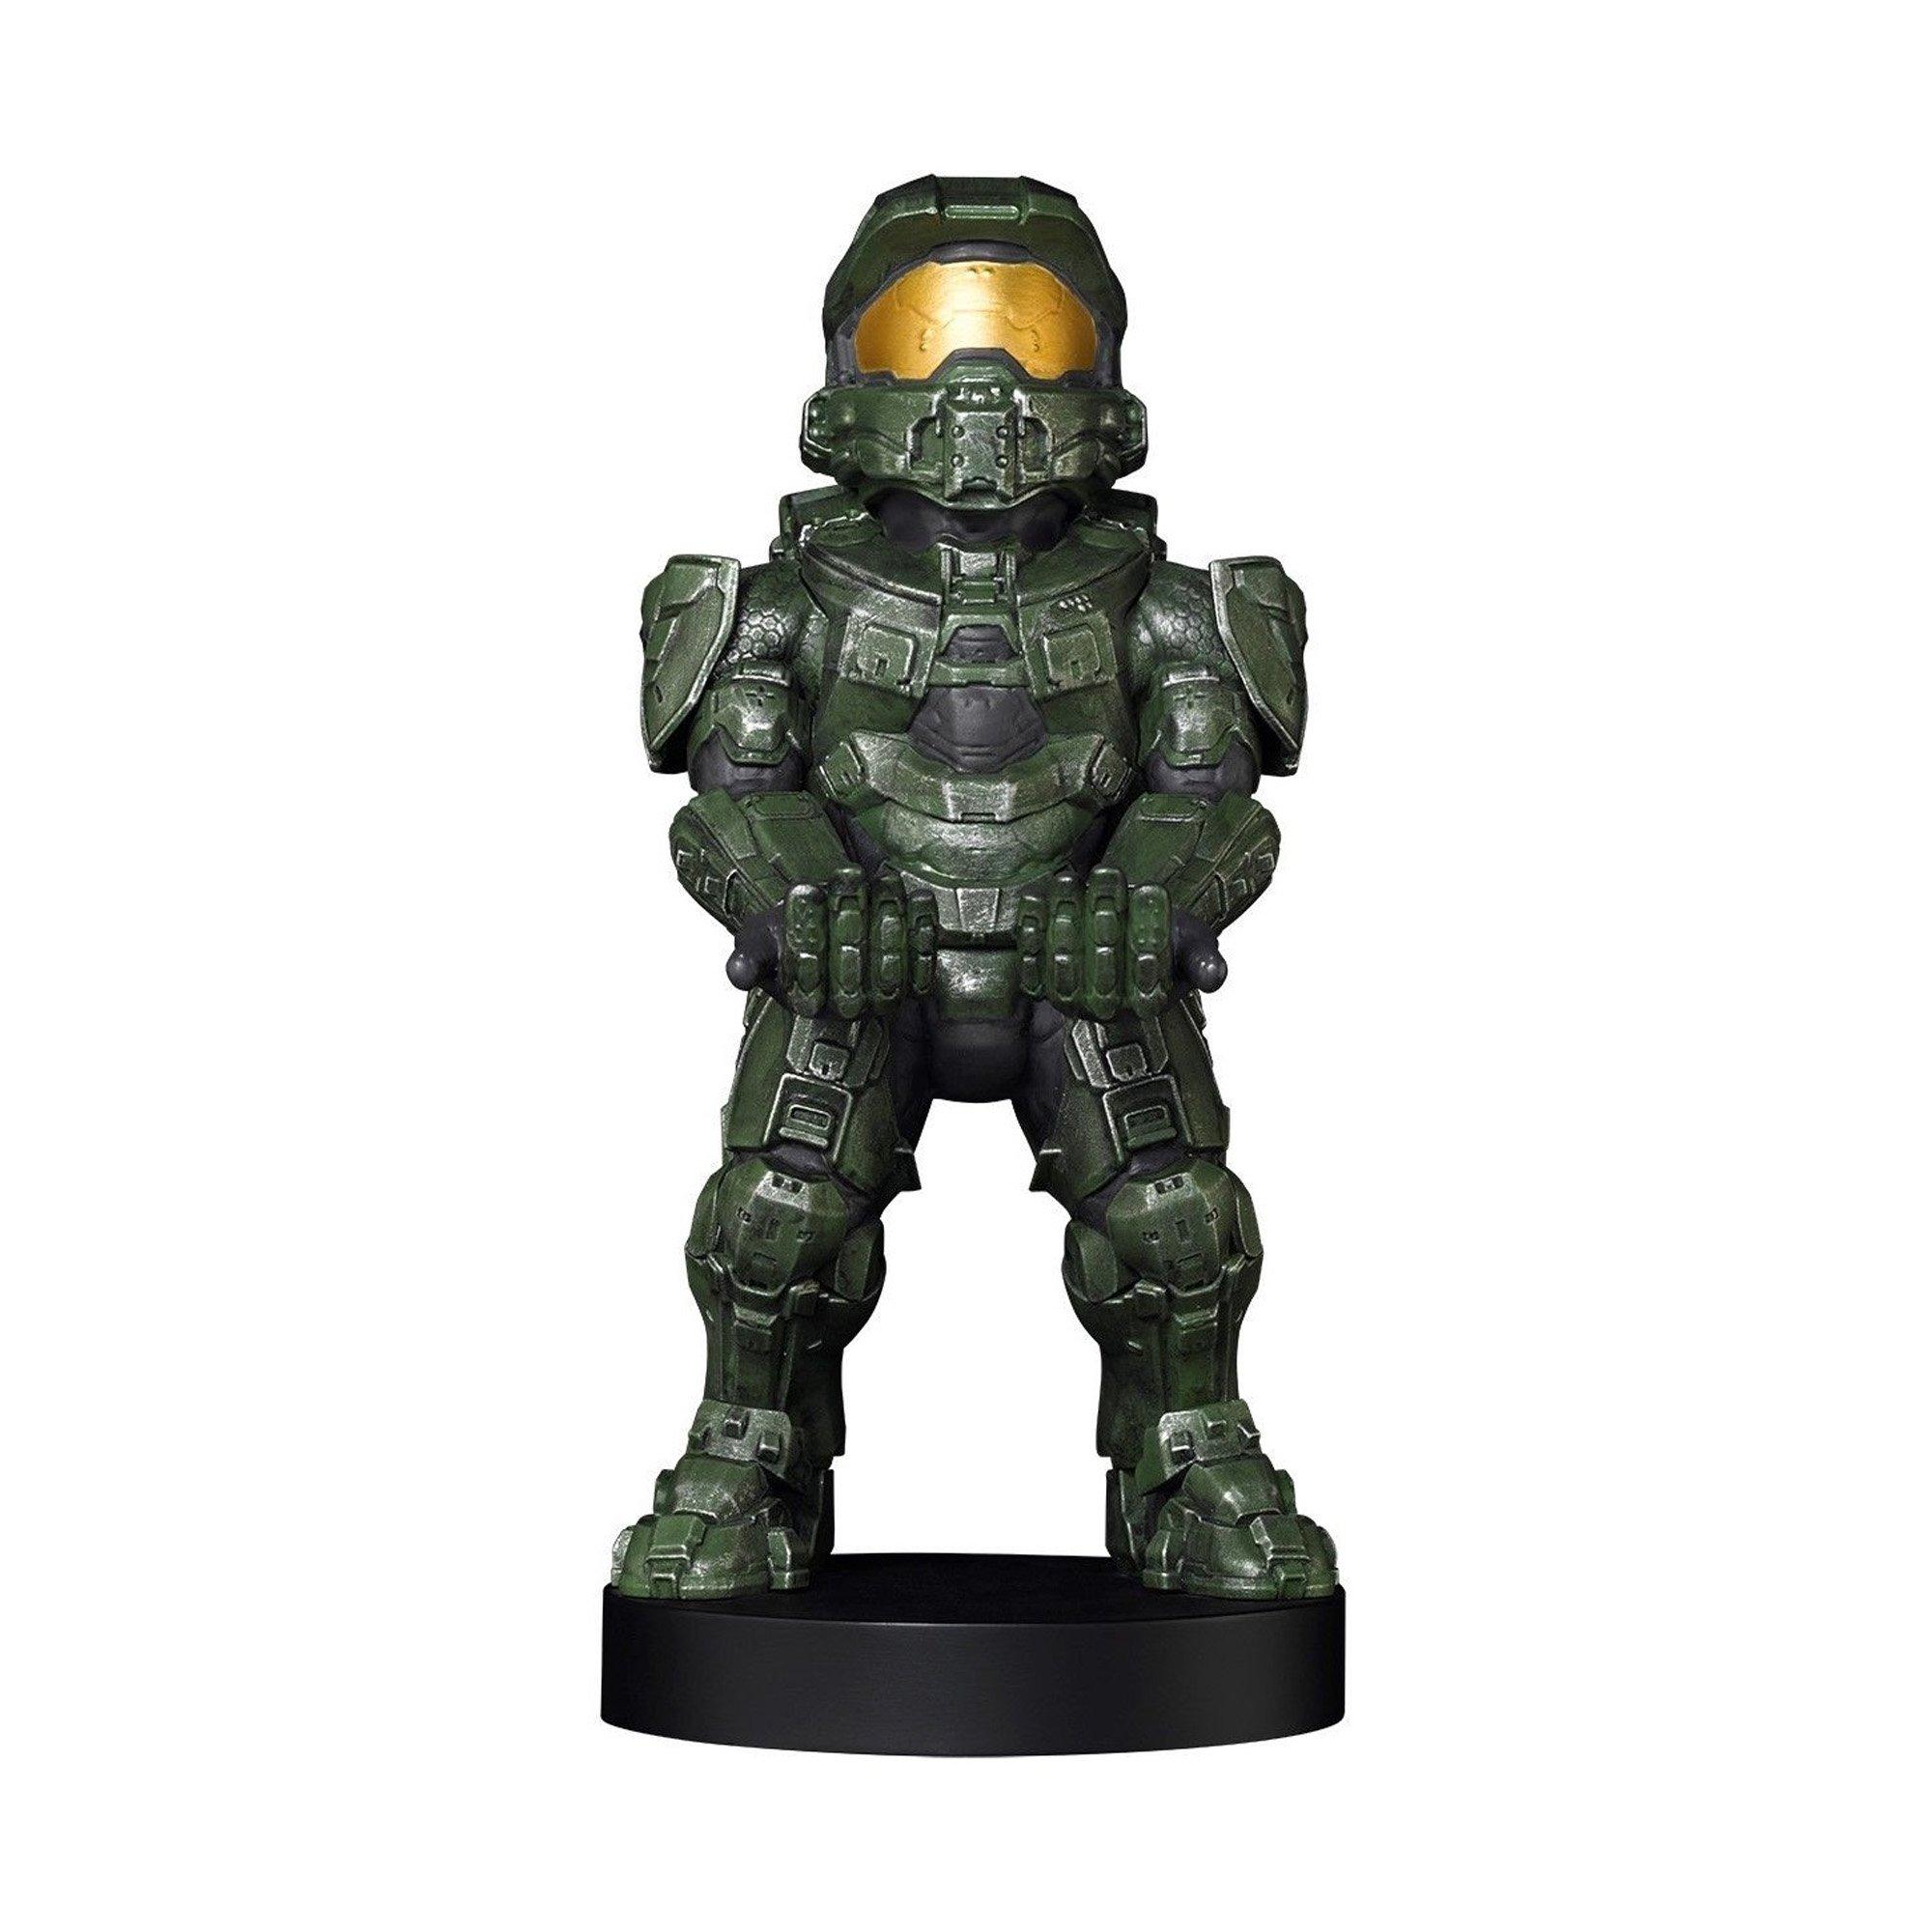 Image of EXQUISITE GAMING Halo: Master Chief - Cable Guy, 20cm Figuren